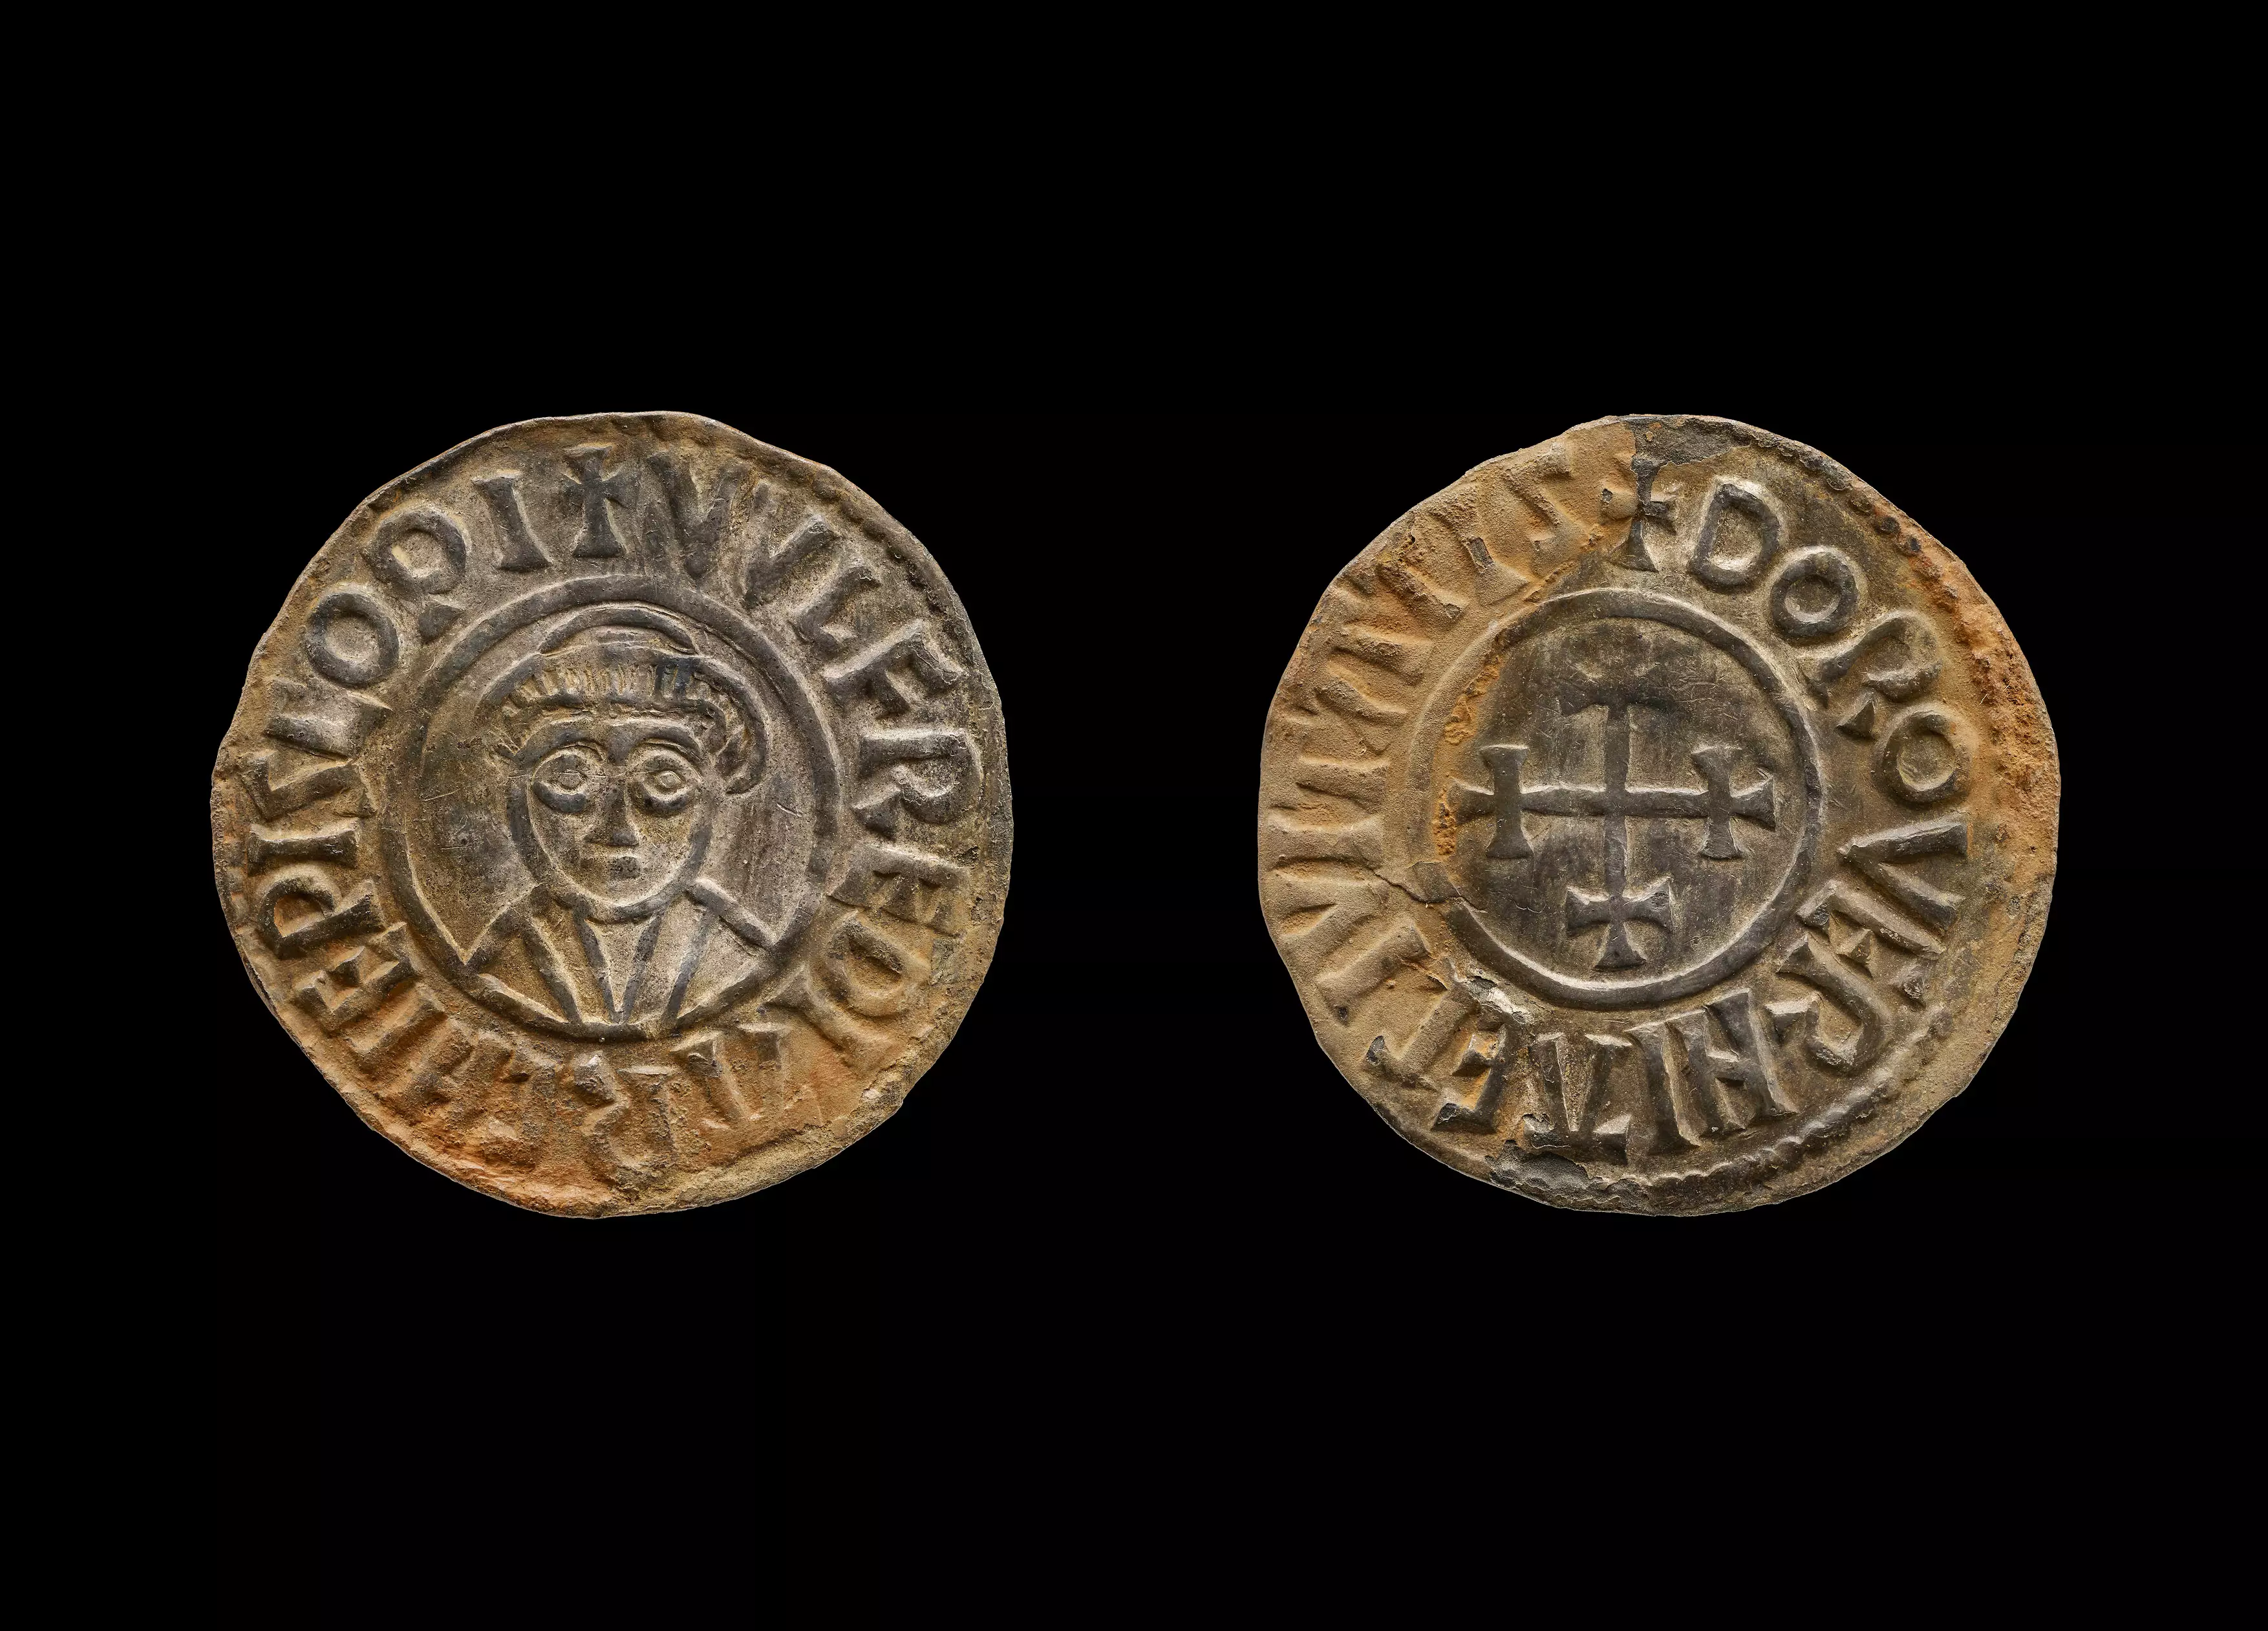 Two of the coins recovered.